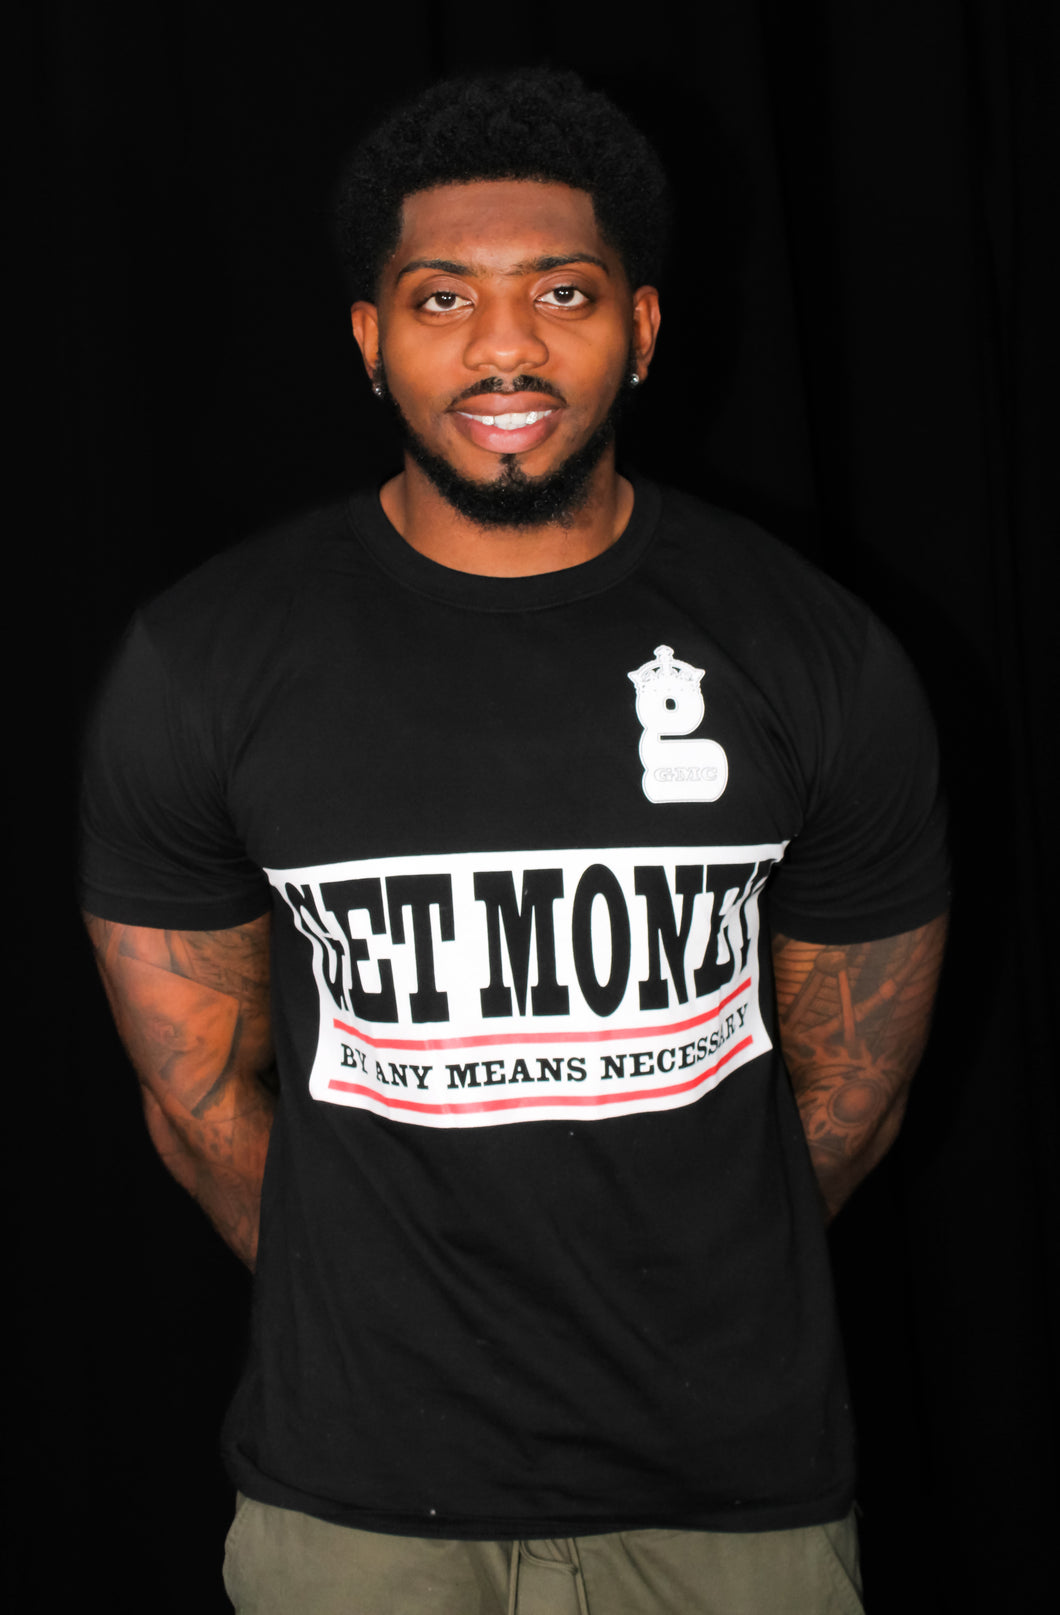 'GET MONEY BY ANY MEANS NECESSARY' T-Shirt Black